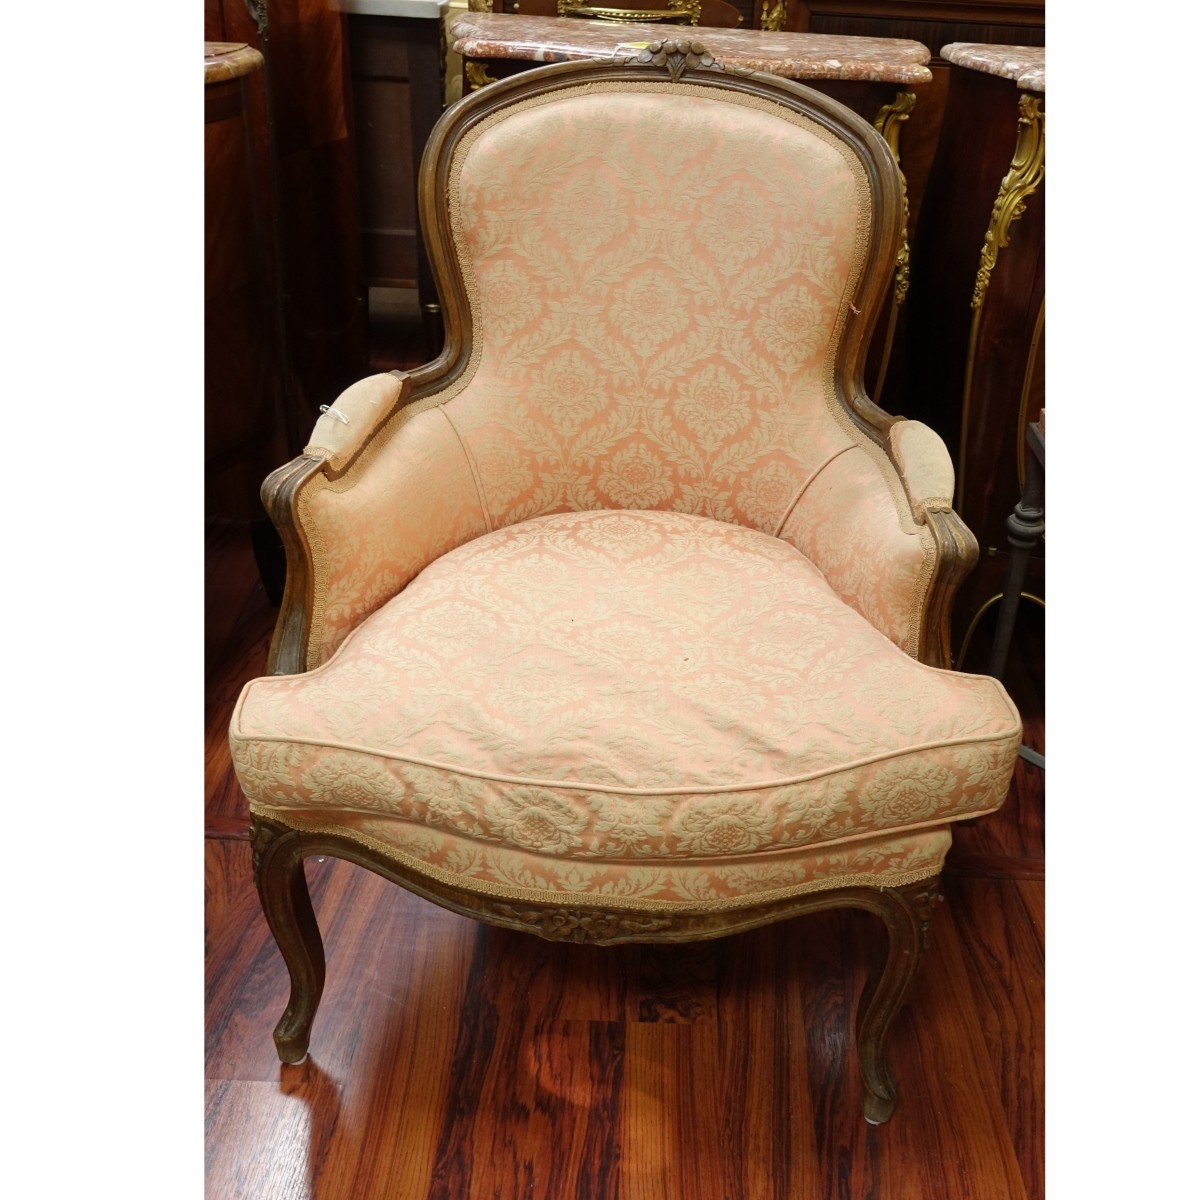 Louis XV Style Bergere Armchair